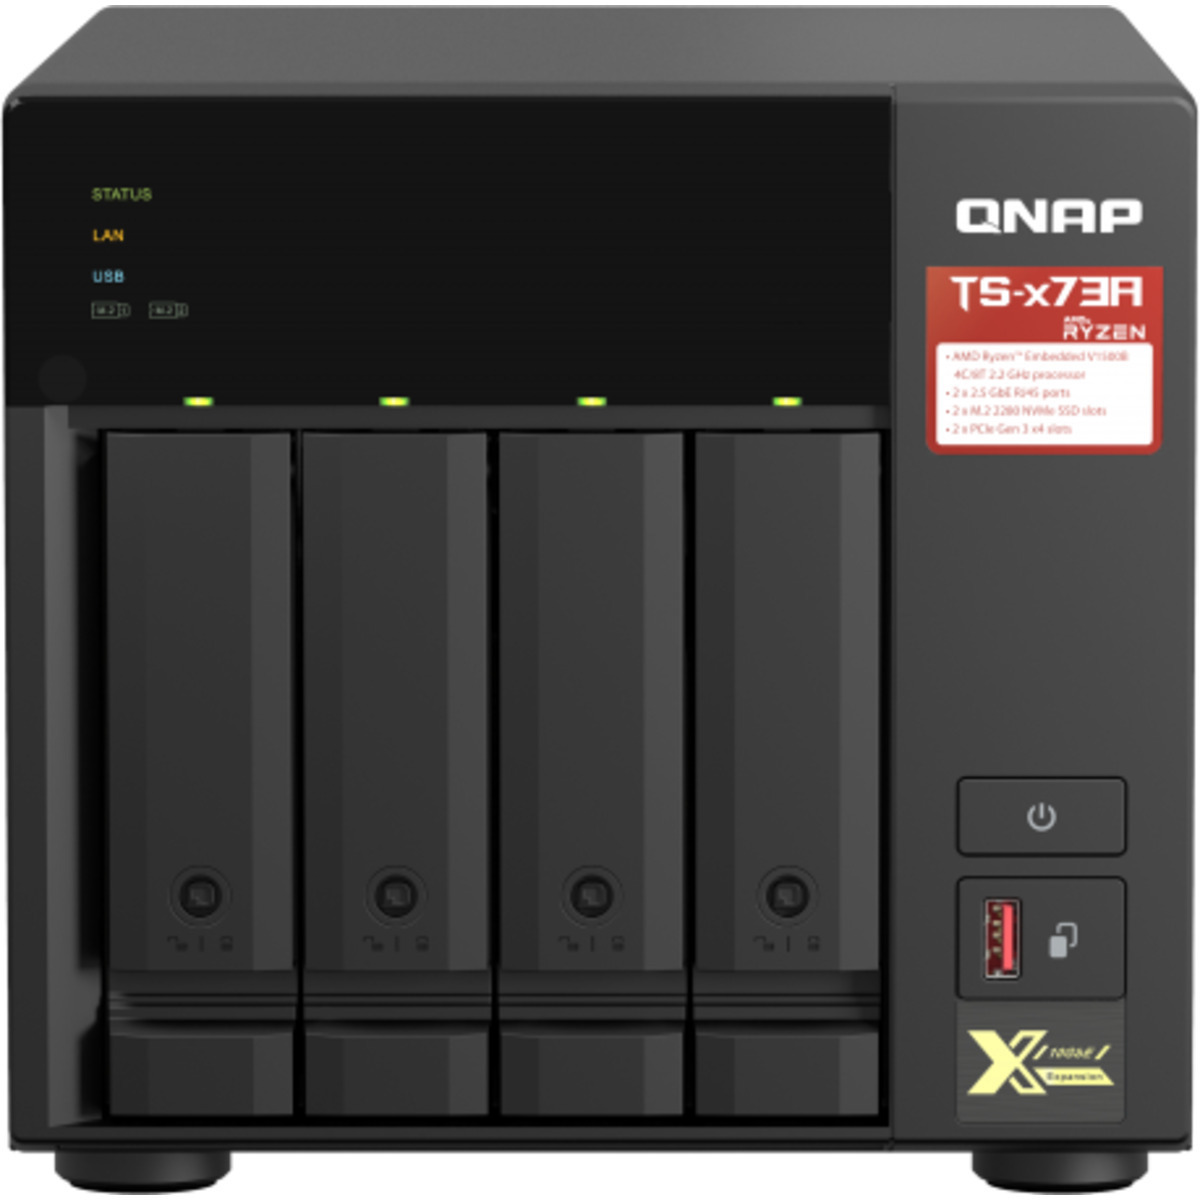 buy $2452 QNAP TS-473A 80tb Desktop NAS - Network Attached Storage Device 4x20000gb Seagate EXOS X20 ST20000NM007D 3.5 7200rpm SATA 6Gb/s HDD ENTERPRISE Class Drives Installed - Burn-In Tested - nas headquarters buy network attached storage server device das new raid-5 free shipping simply usa TS-473A